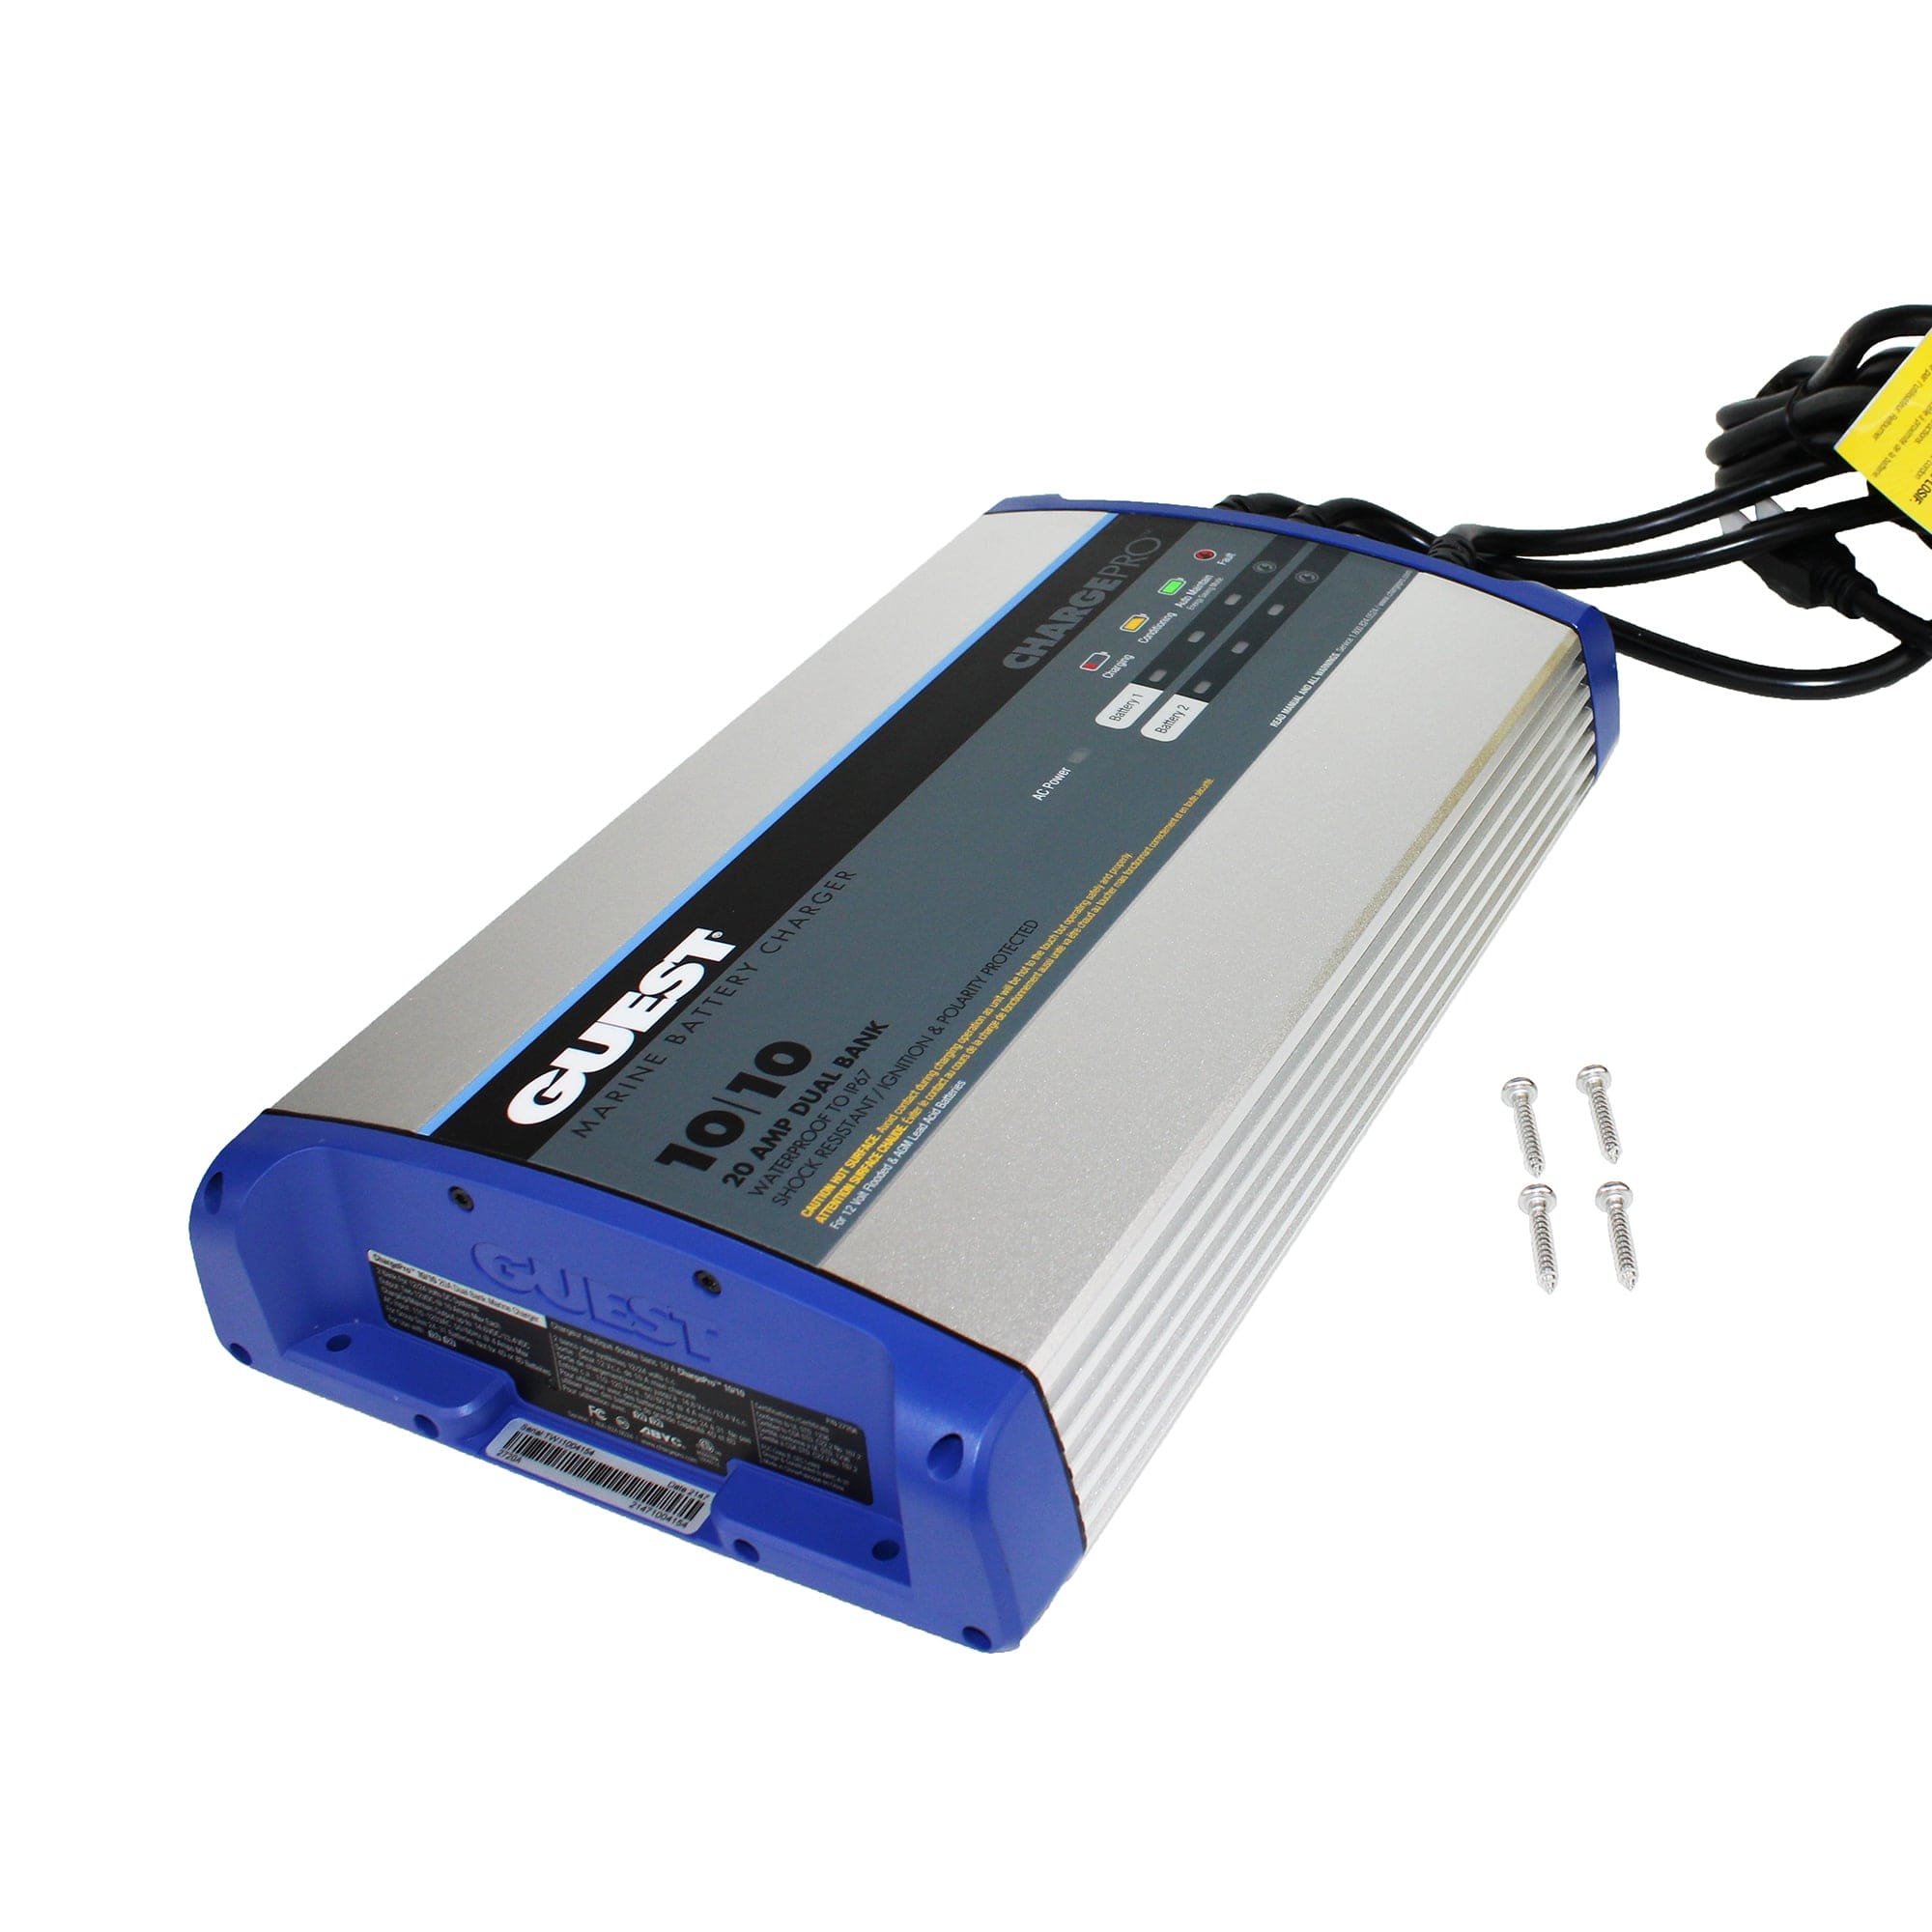 Guest 2720A Power Products ChargePRO On-Board Battery Charger 20A, 12V, 2 Bank, 120V Input